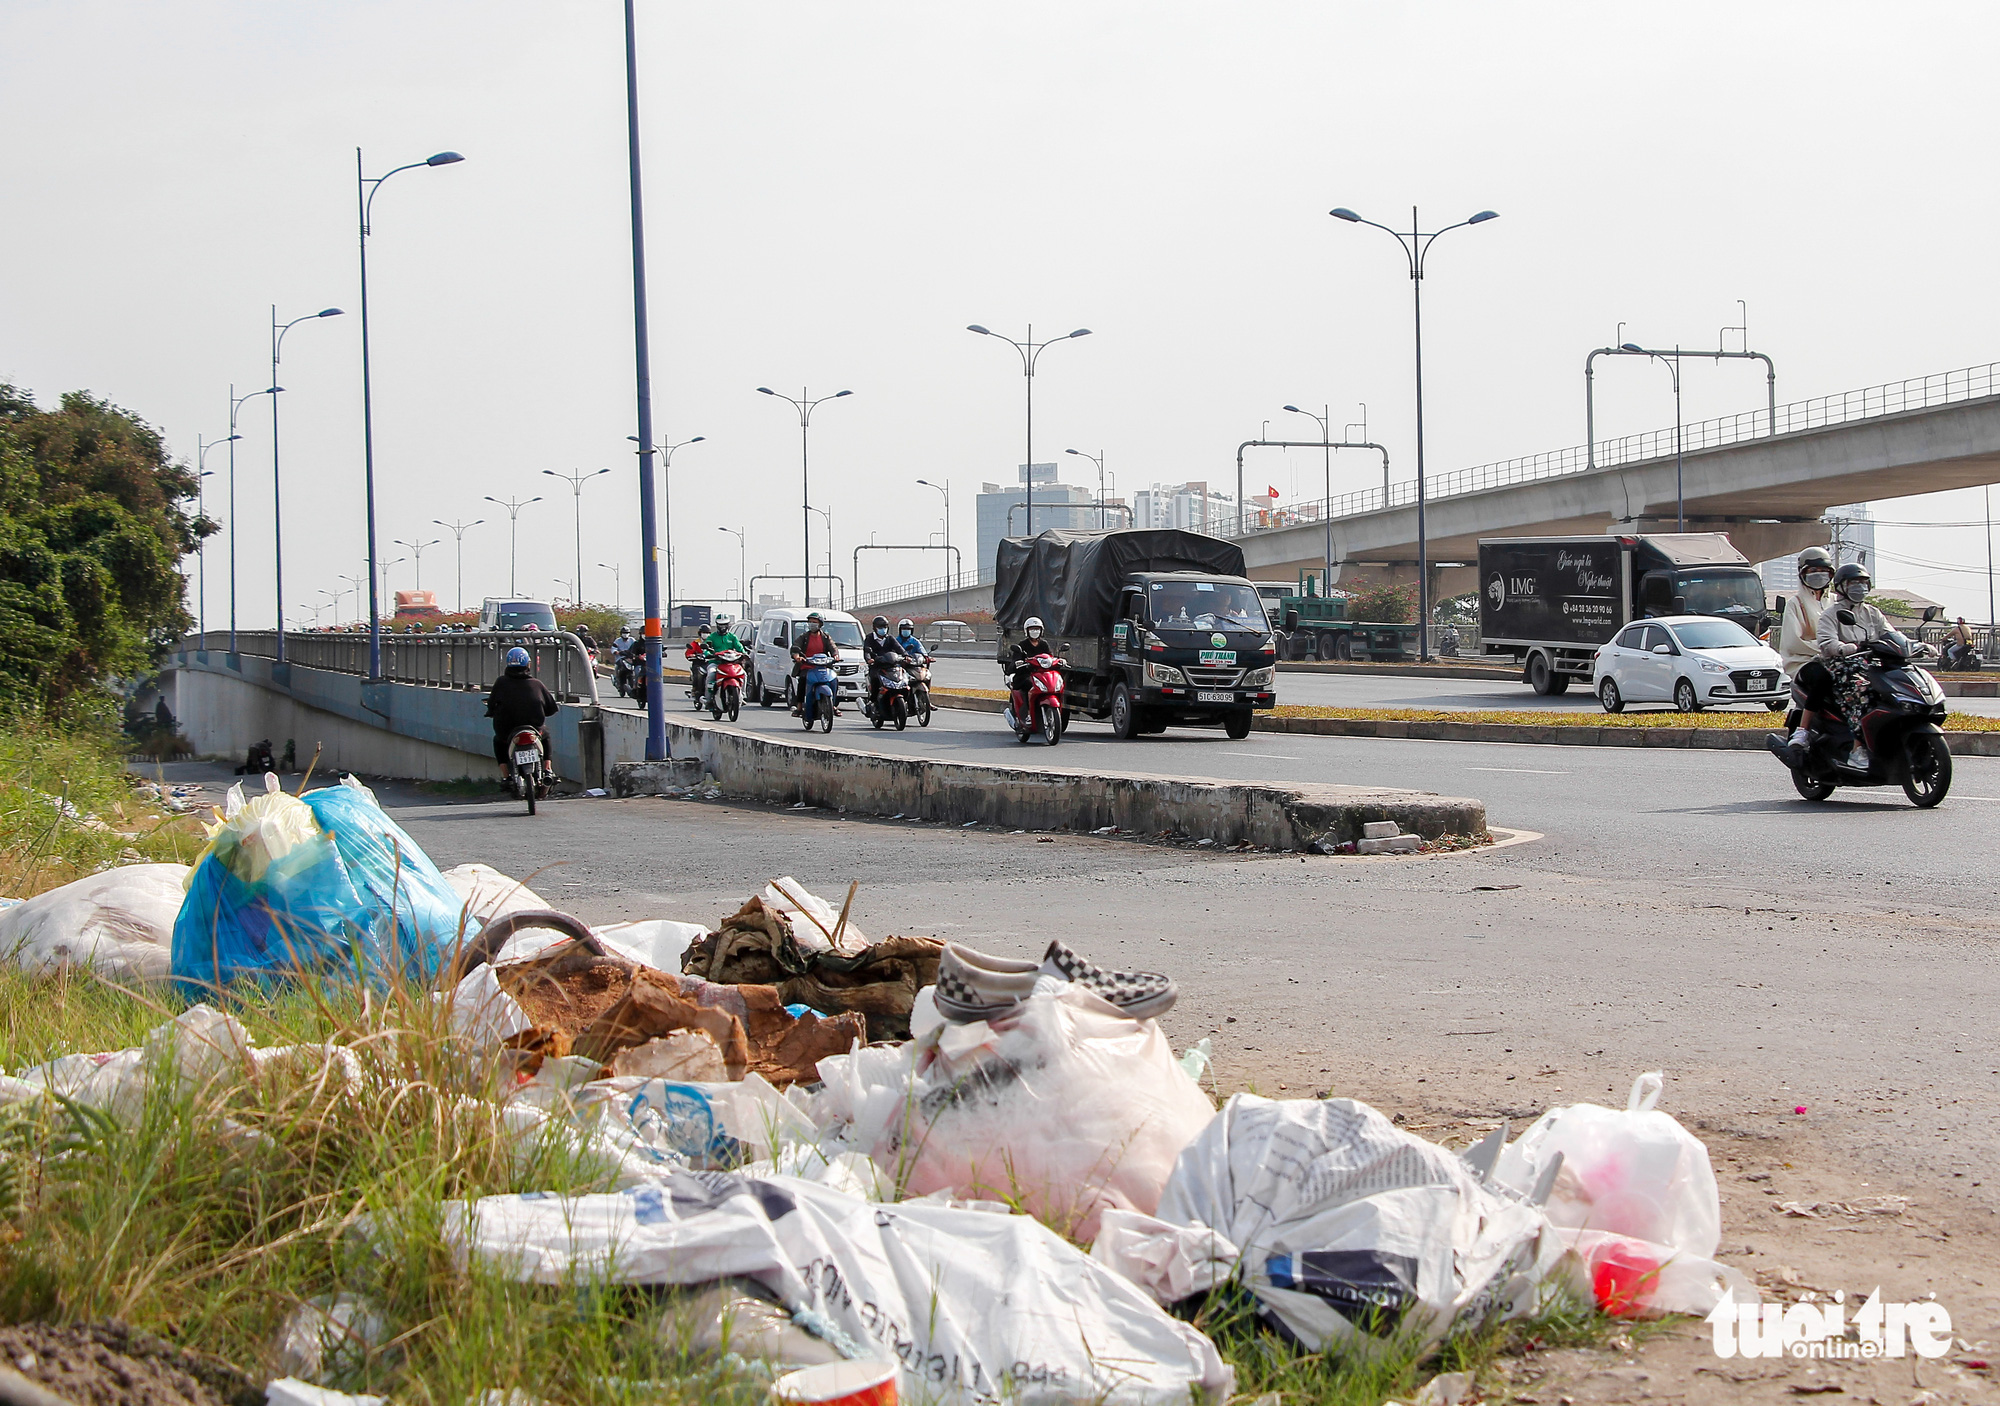 Trash is dumped at the foot of the Rach Chiec Bridge in Thu Duc City. Photo: Kim Ut / Tuoi Tre